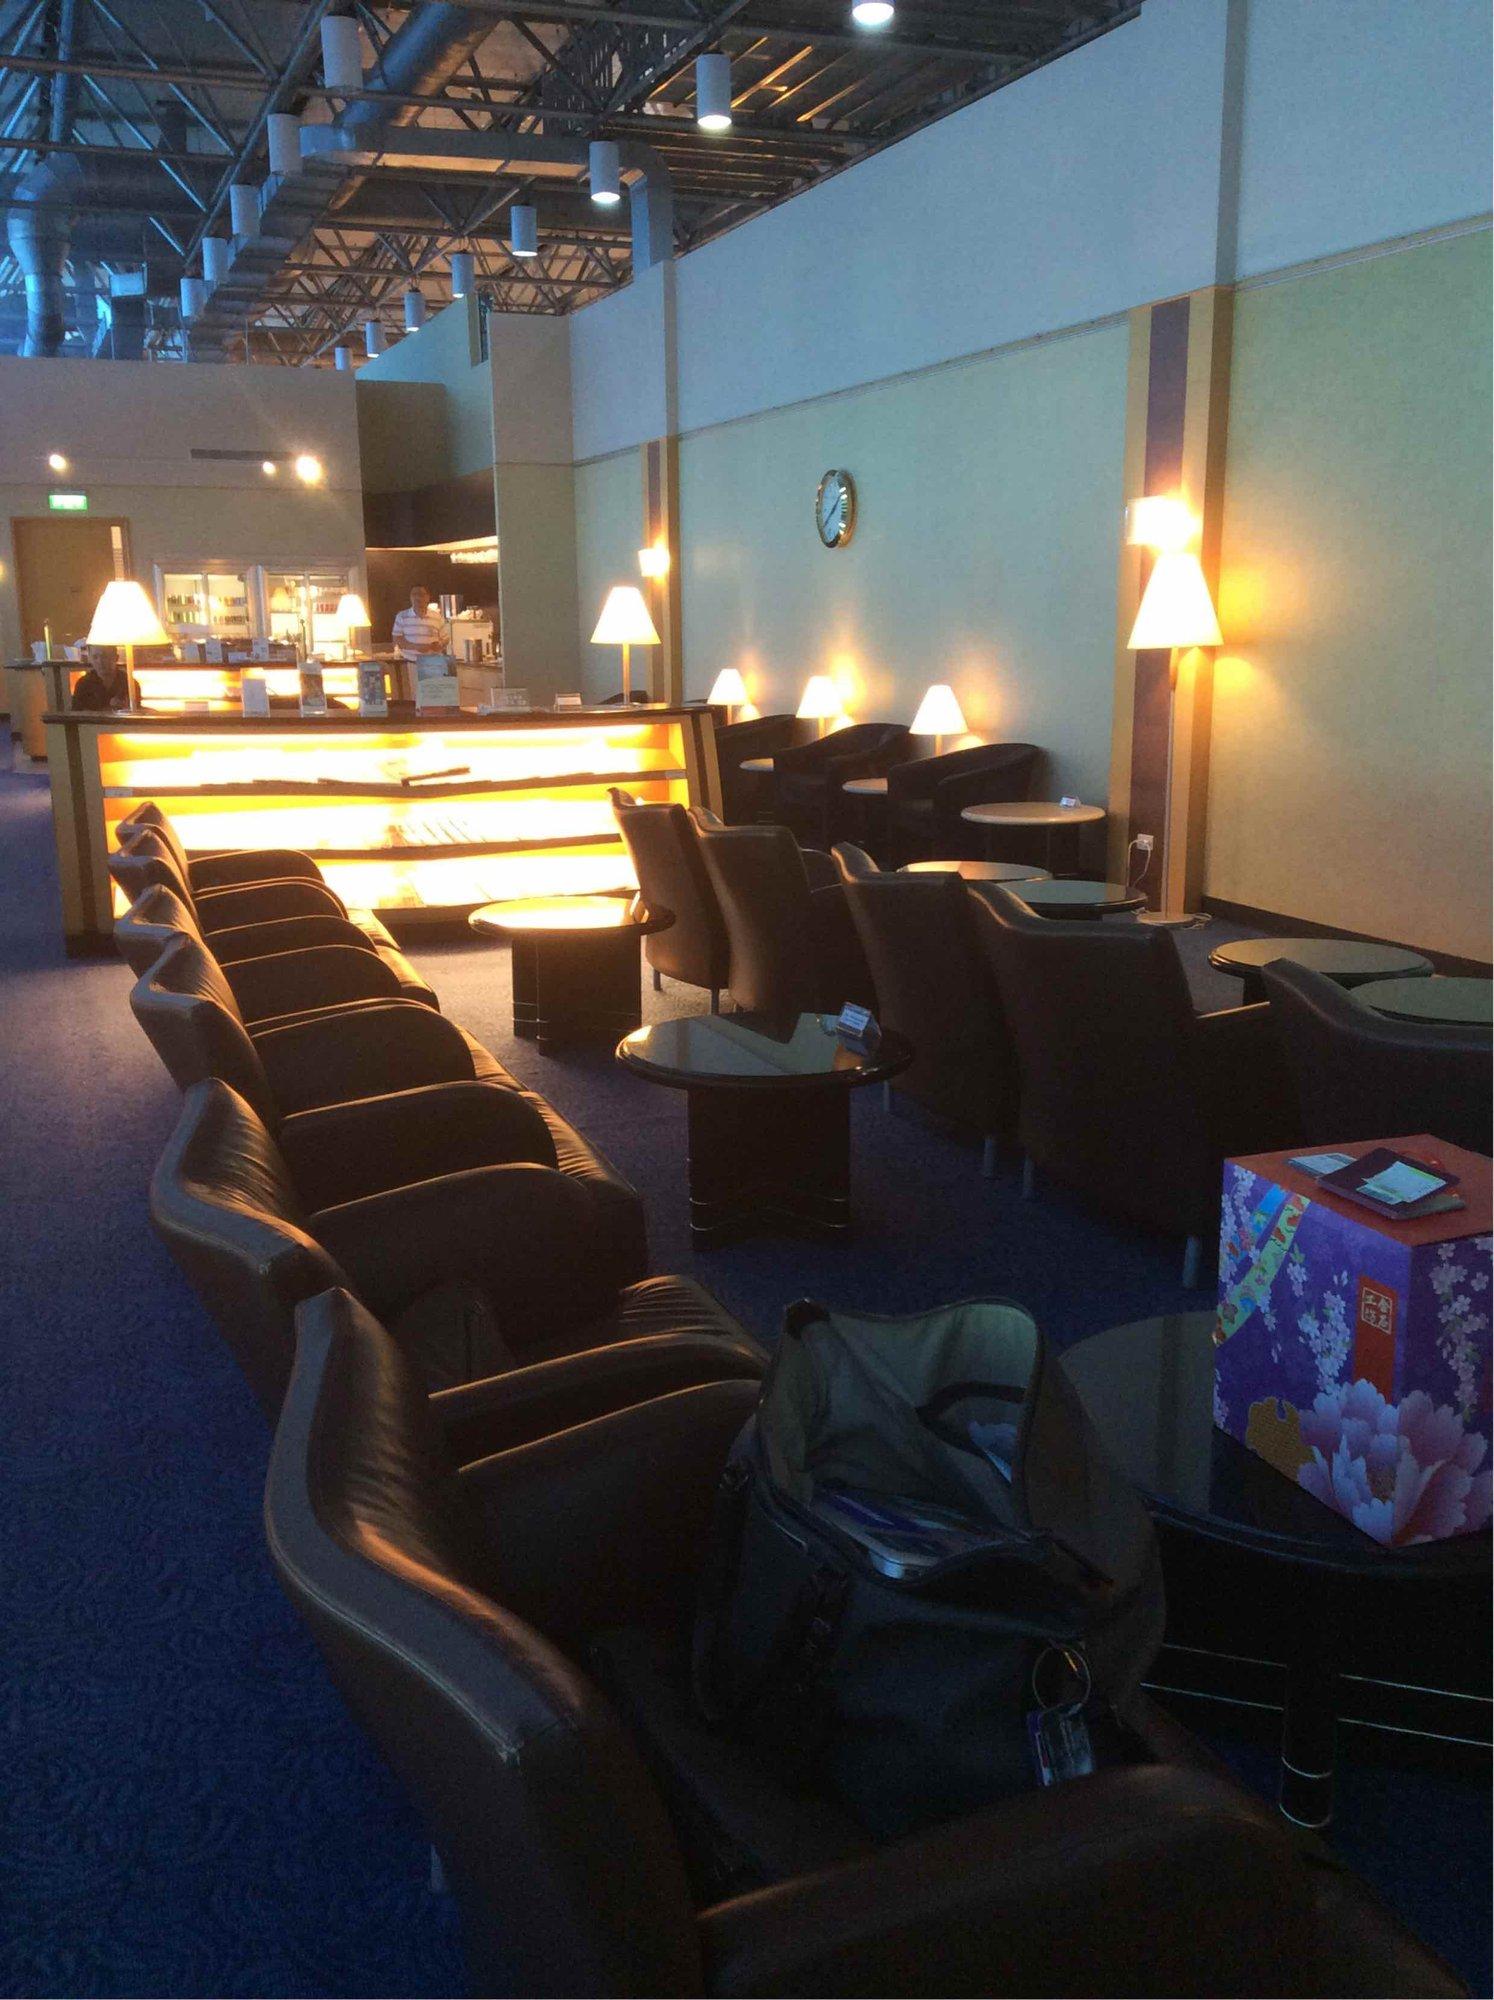 Singapore Airlines SilverKris Business Class Lounge image 9 of 14